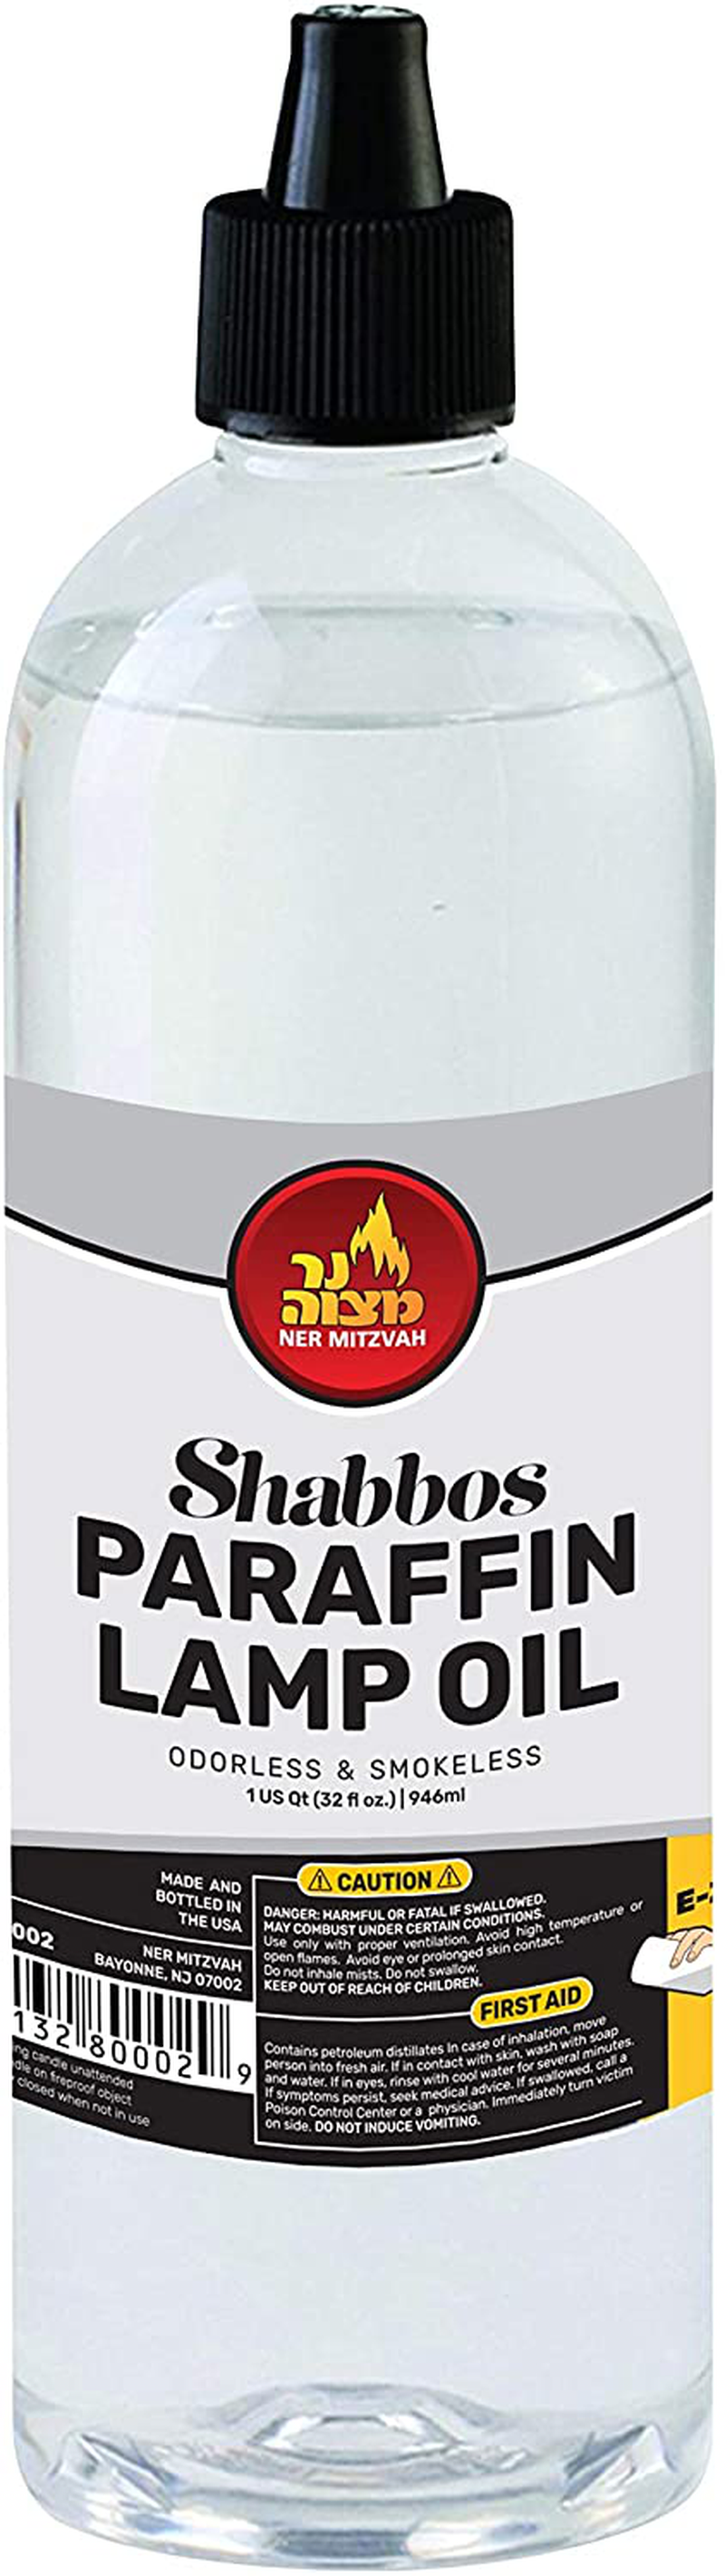 Paraffin Lamp Oil - Clear Smokeless, Odorless, Clean Burning Fuel for Indoor and Outdoor Use with E-Z Fill Cap and Pouring Spout - 32oz - by Ner Mitzvah Home & Garden > Lighting Accessories > Oil Lamp Fuel Ner Mitzvah Default Title  